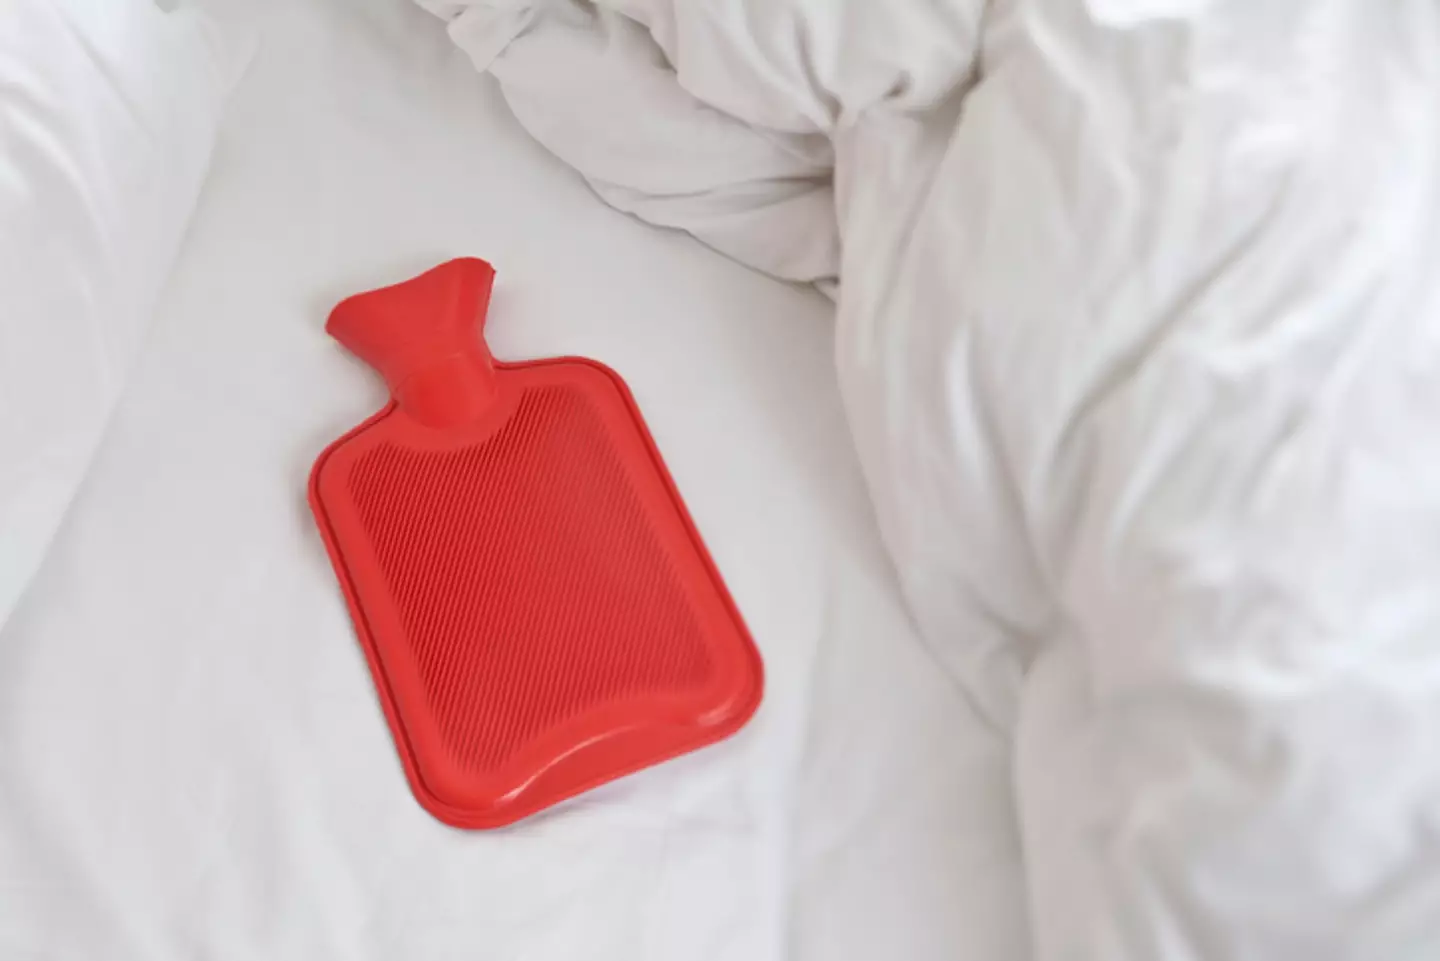 A hot water bottle will help turn your bed into a cocoon of cosiness.